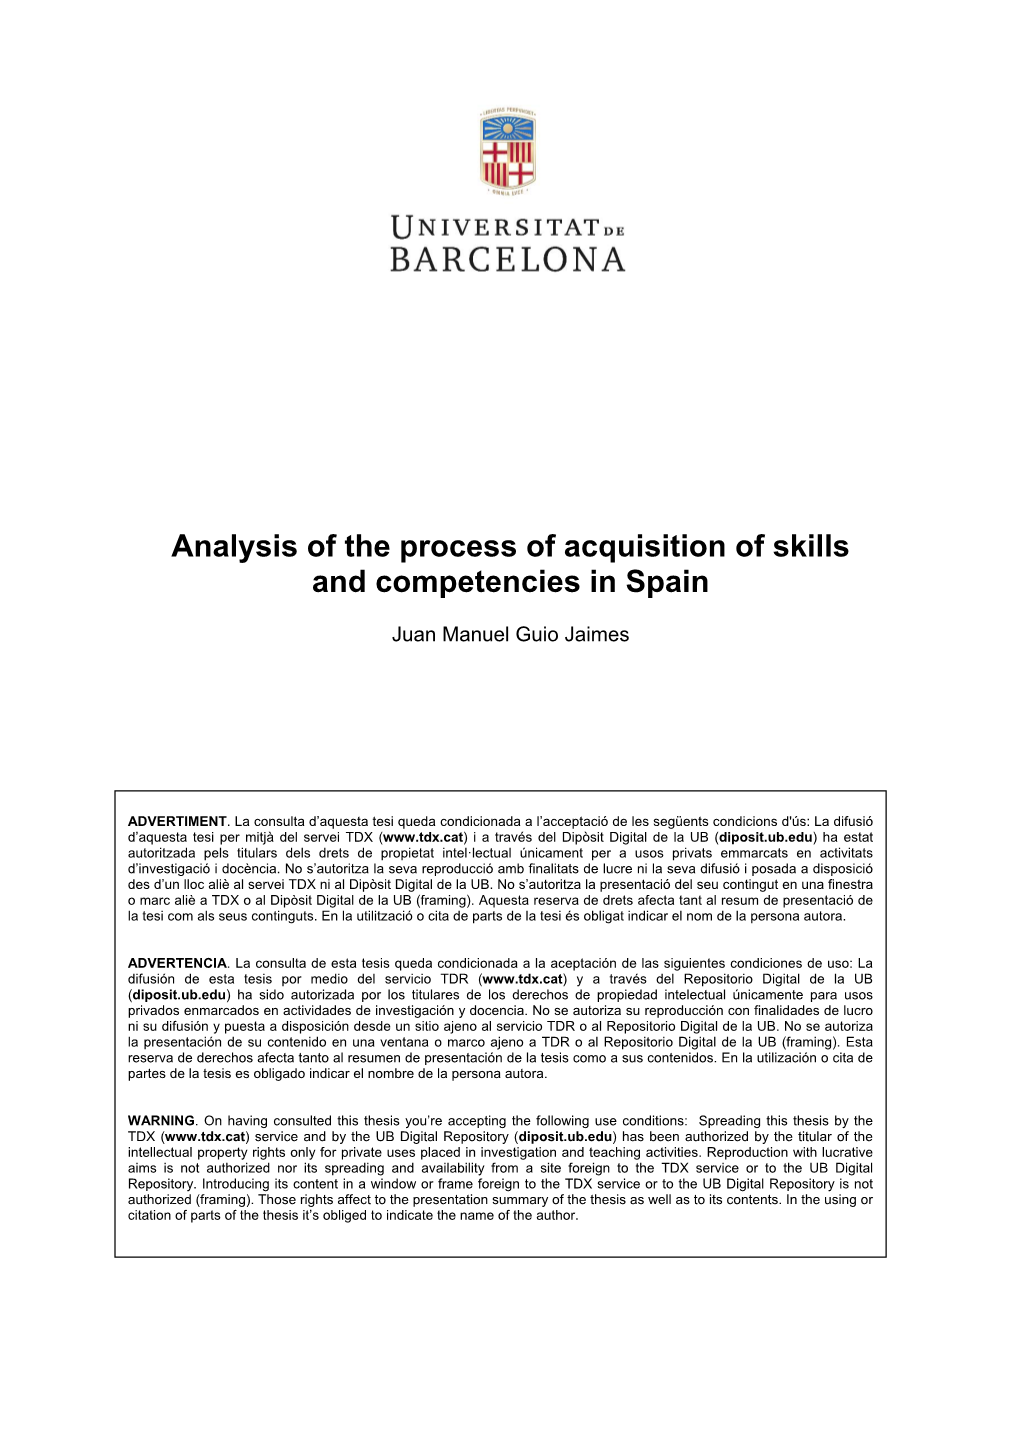 Analysis of the Process of Acquisition of Skills and Competencies in Spain